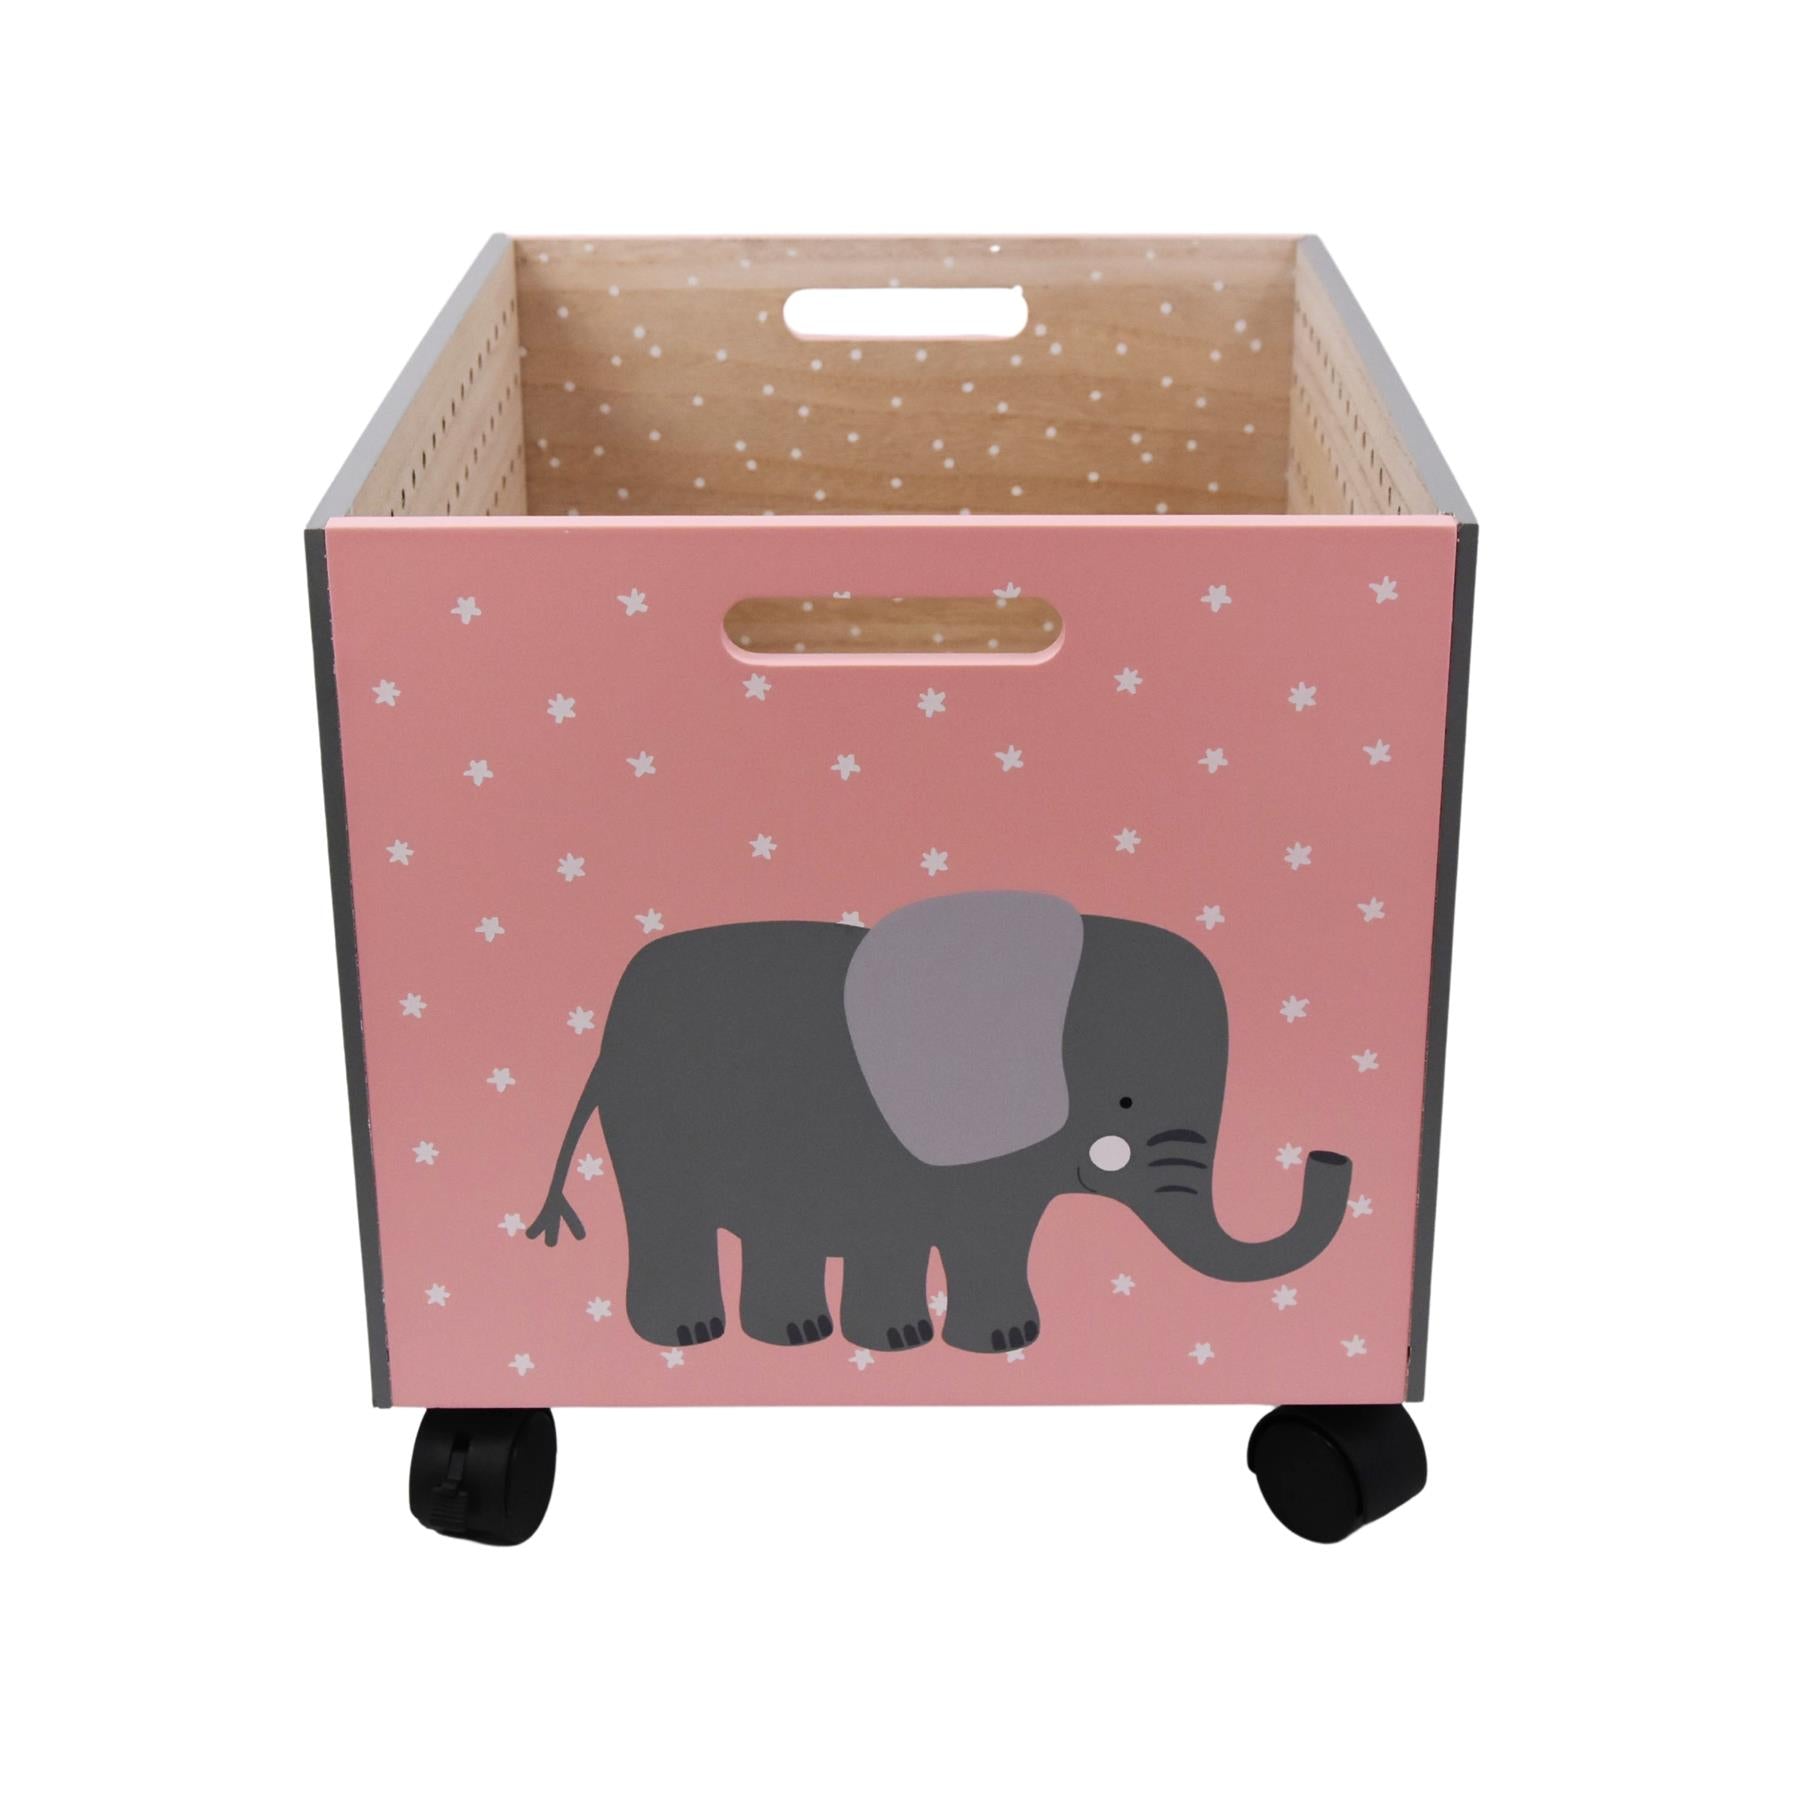 The Magic Toy Shop Elephant Design Kids Wooden Storage Chest On Wheels